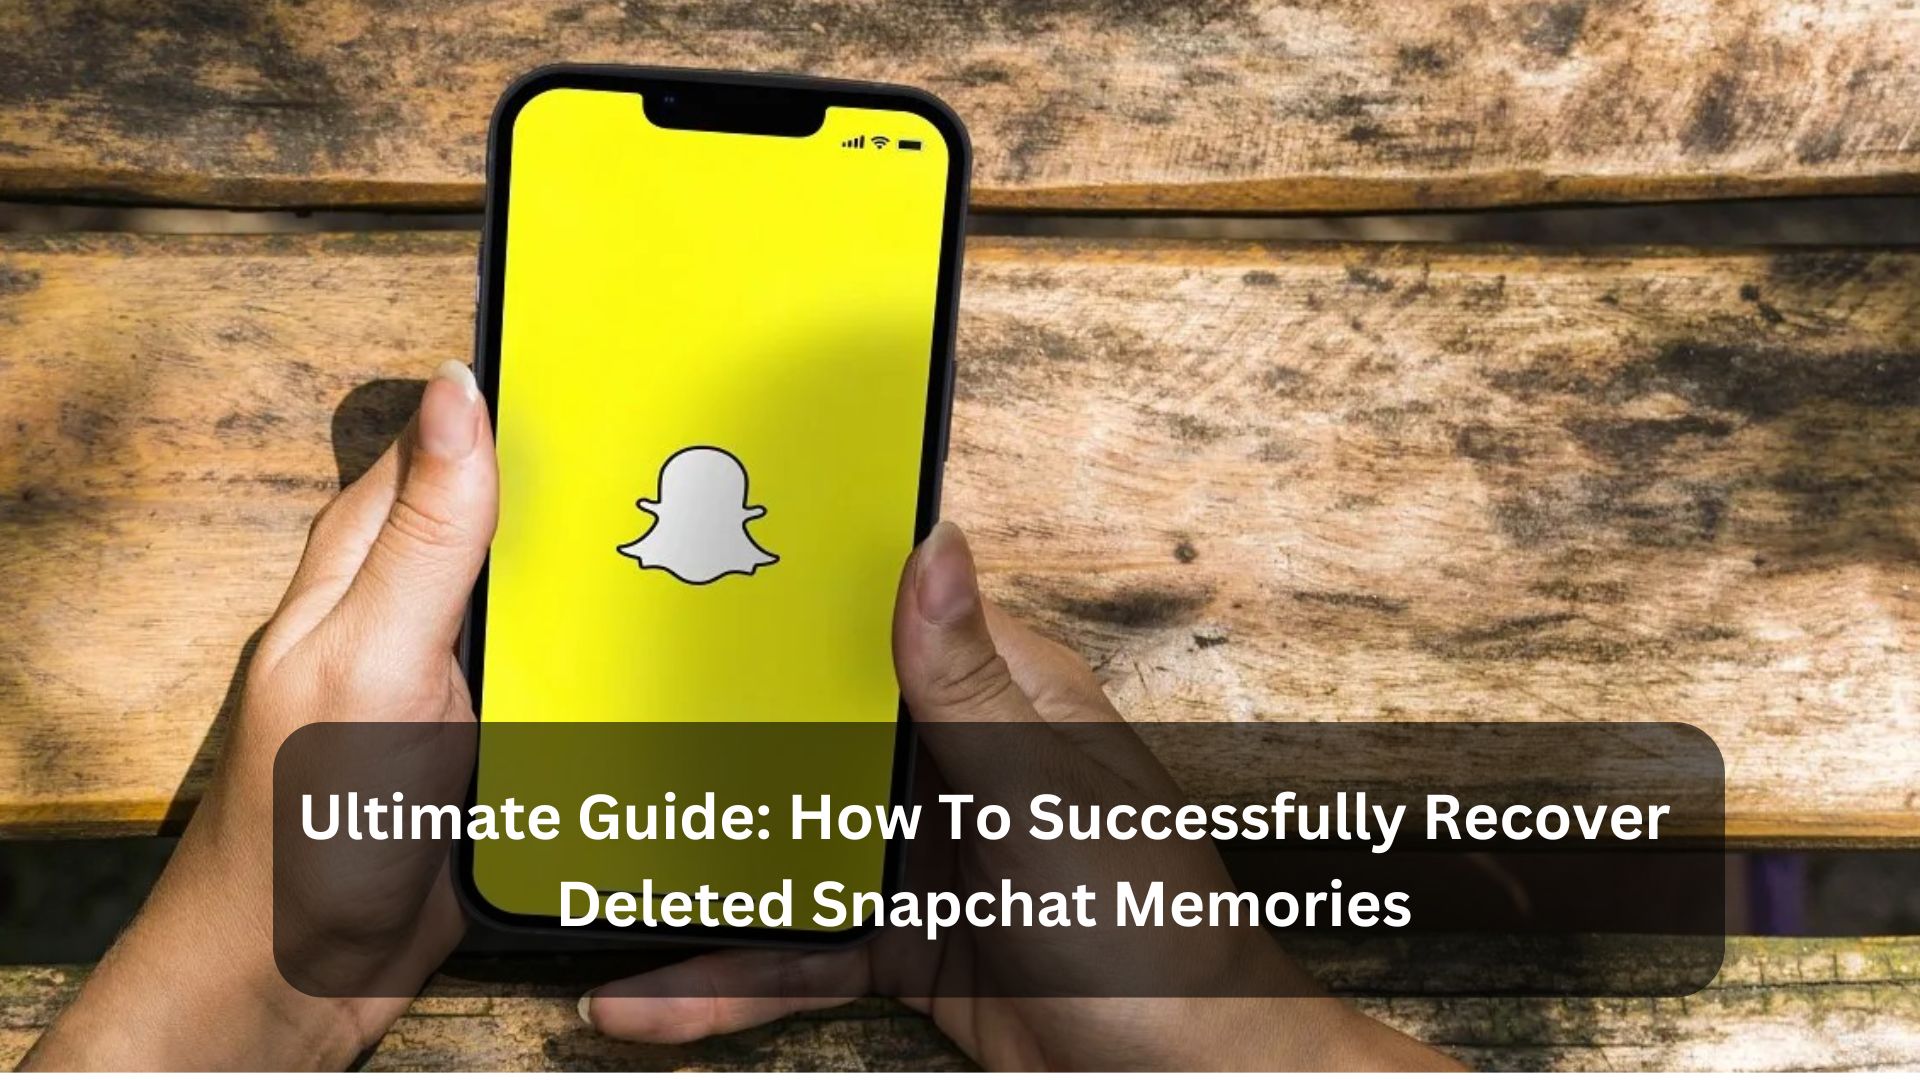 Ultimate Guide: How To Successfully Recover Deleted Snapchat Memories